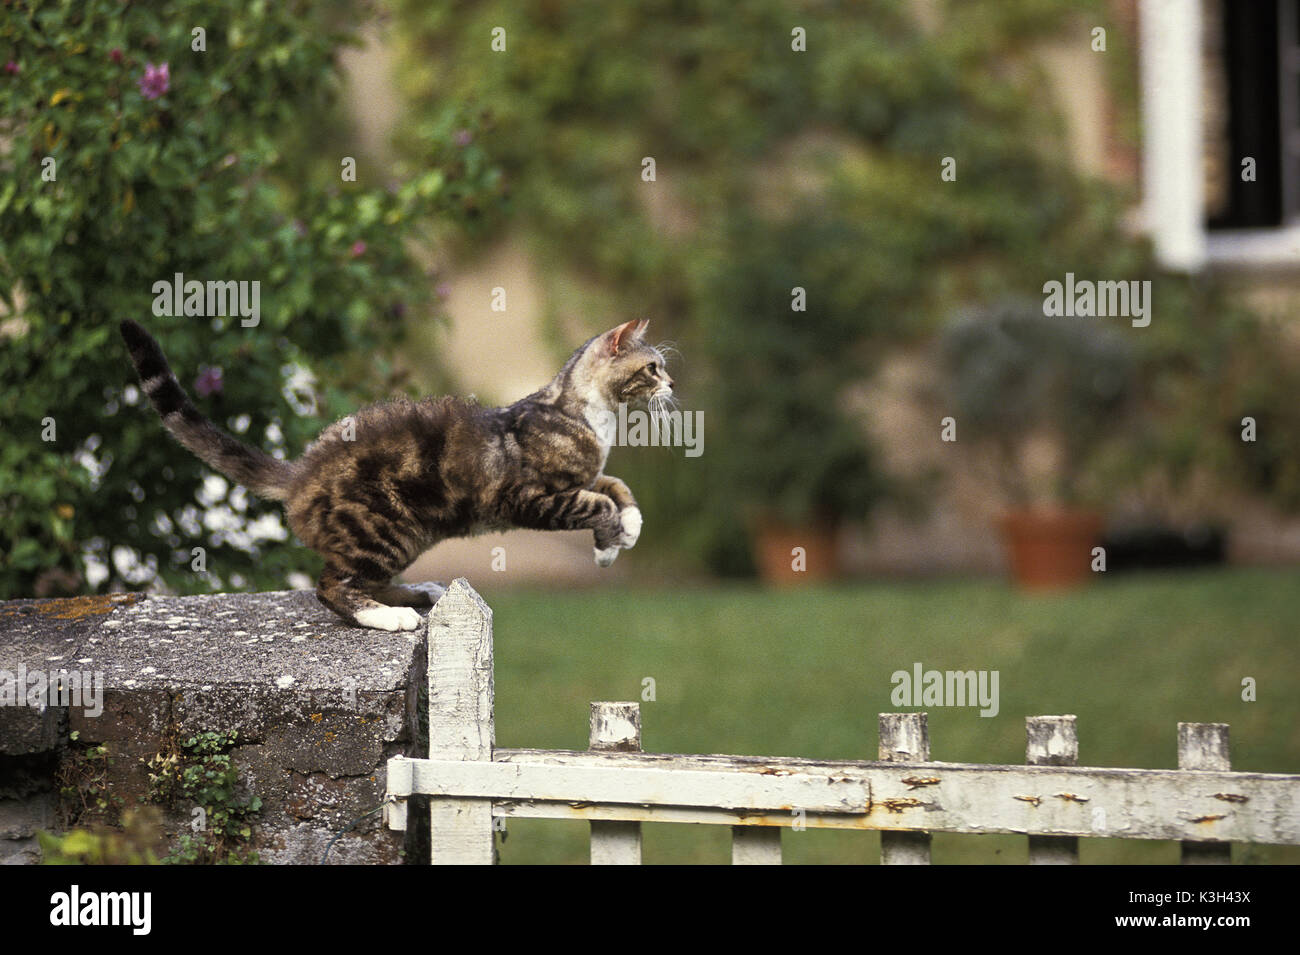 American Wirehair Domestic Cat, Adult jumping  over Fence Stock Photo